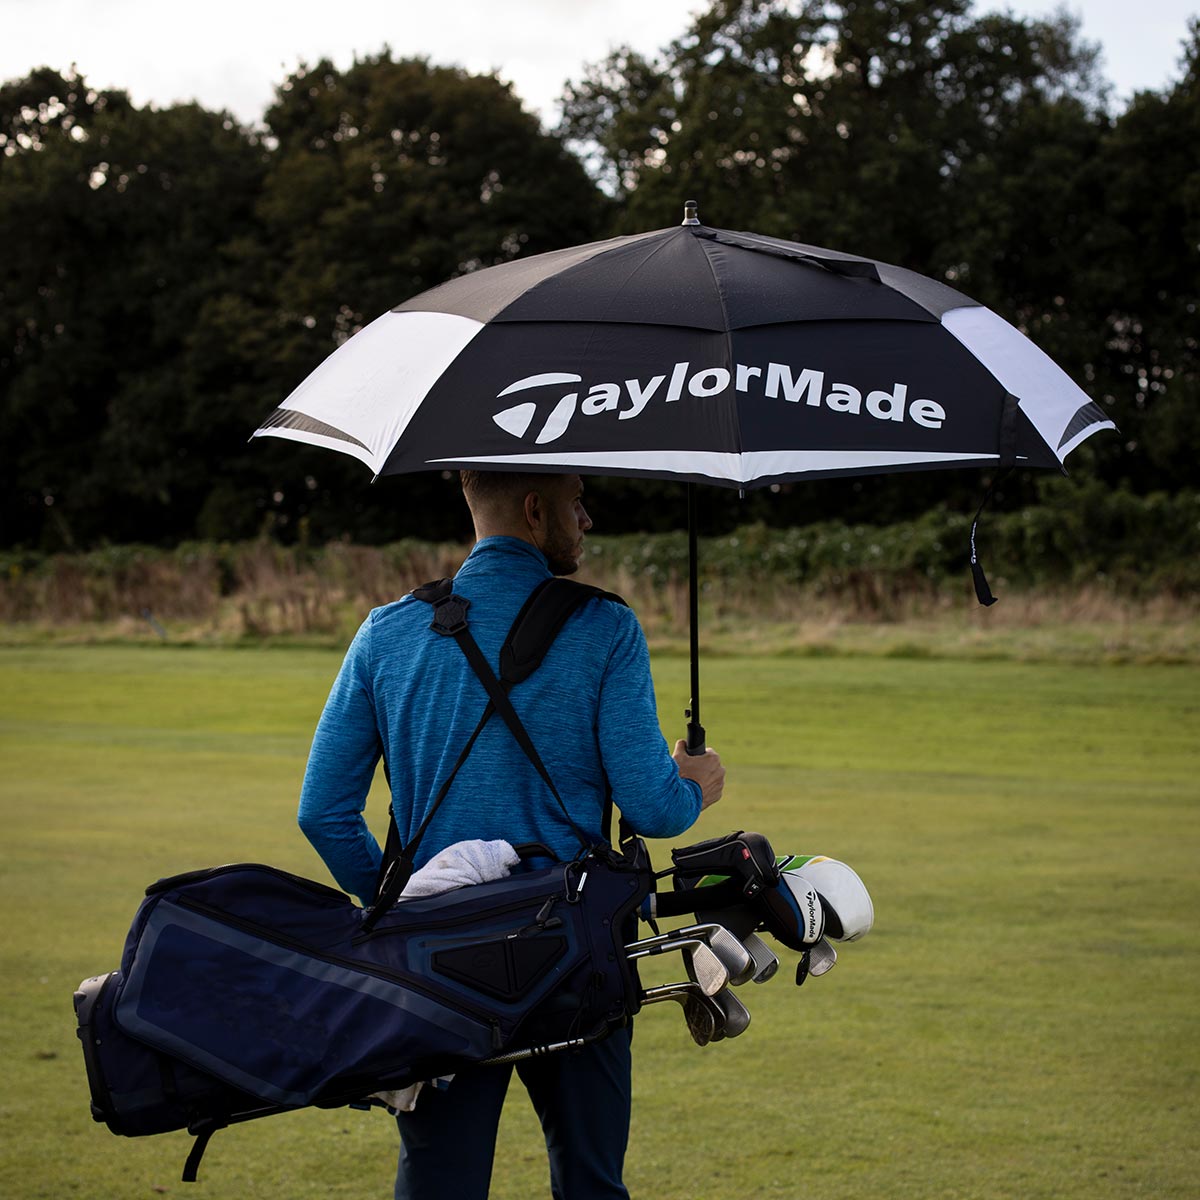 taylormade tour double canopy 64 umbrella